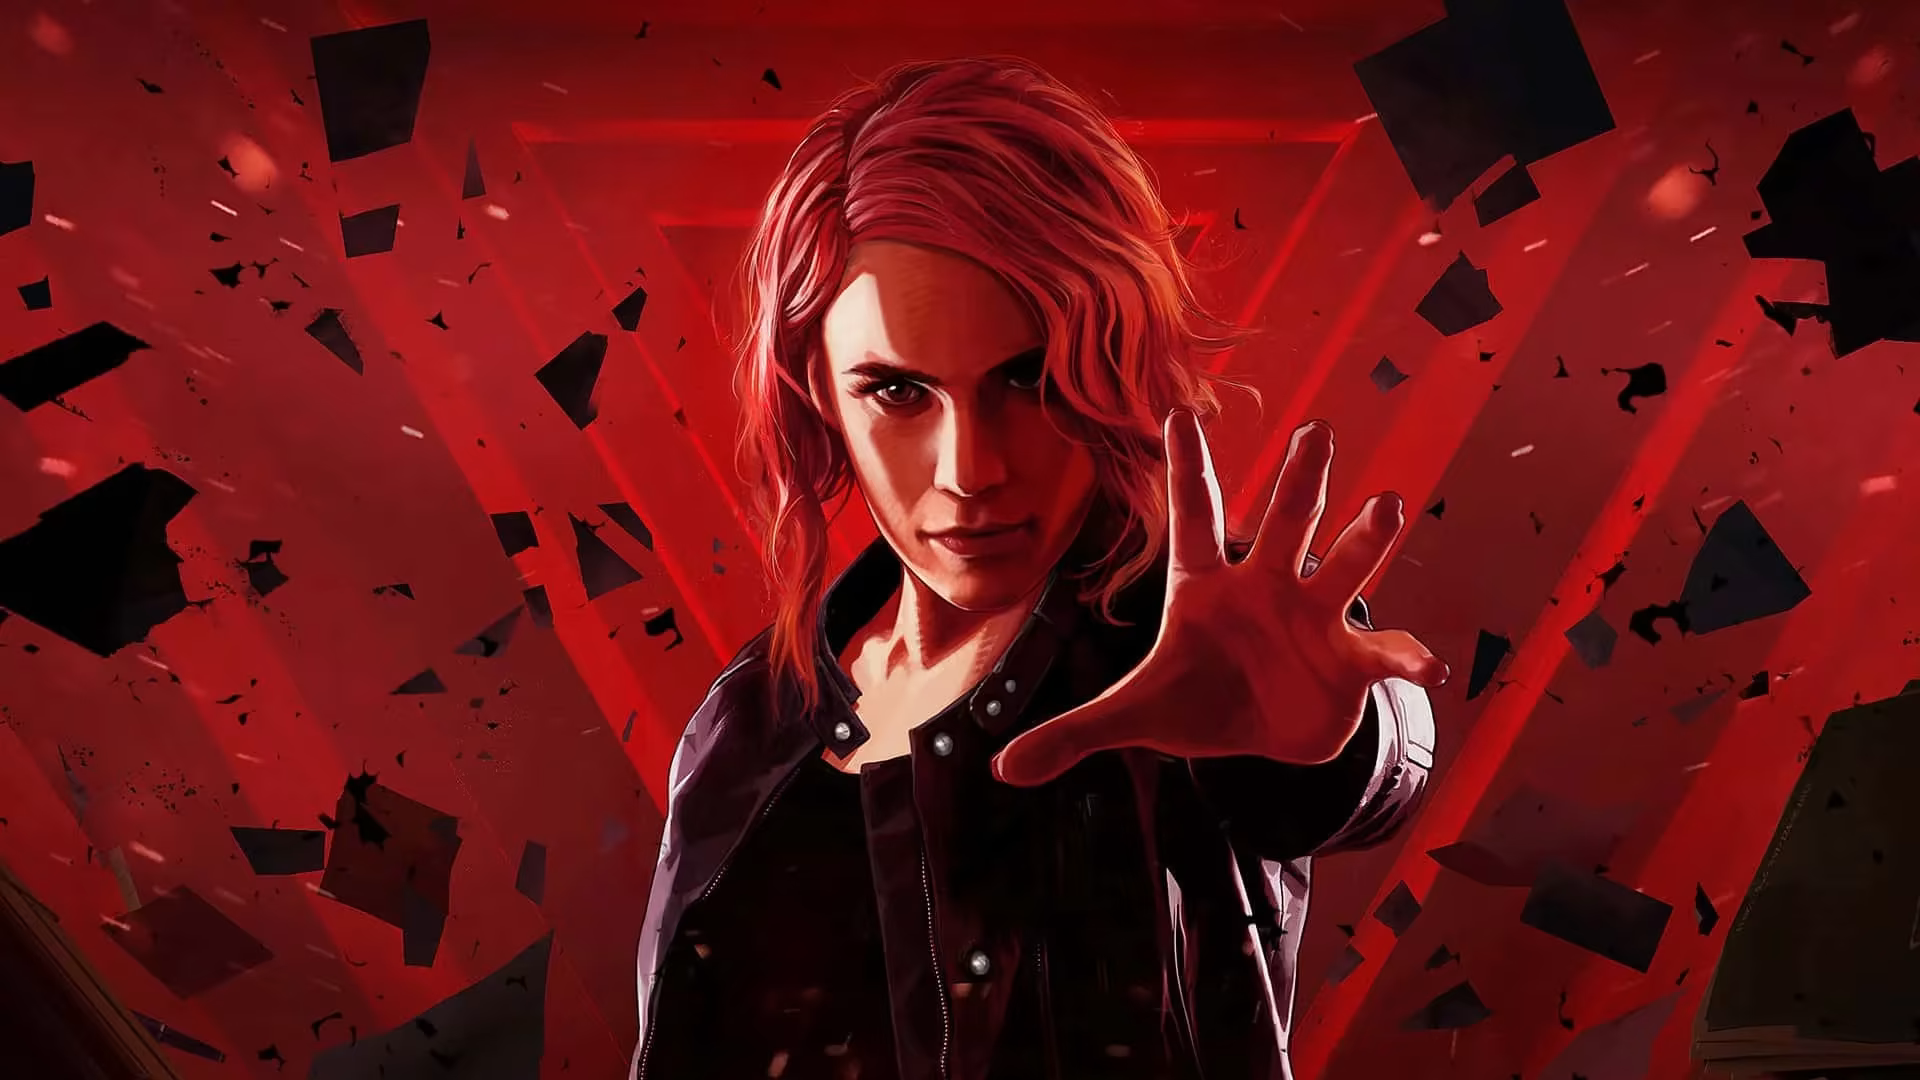 Remedy Acquires Full Rights to the Control Franchise